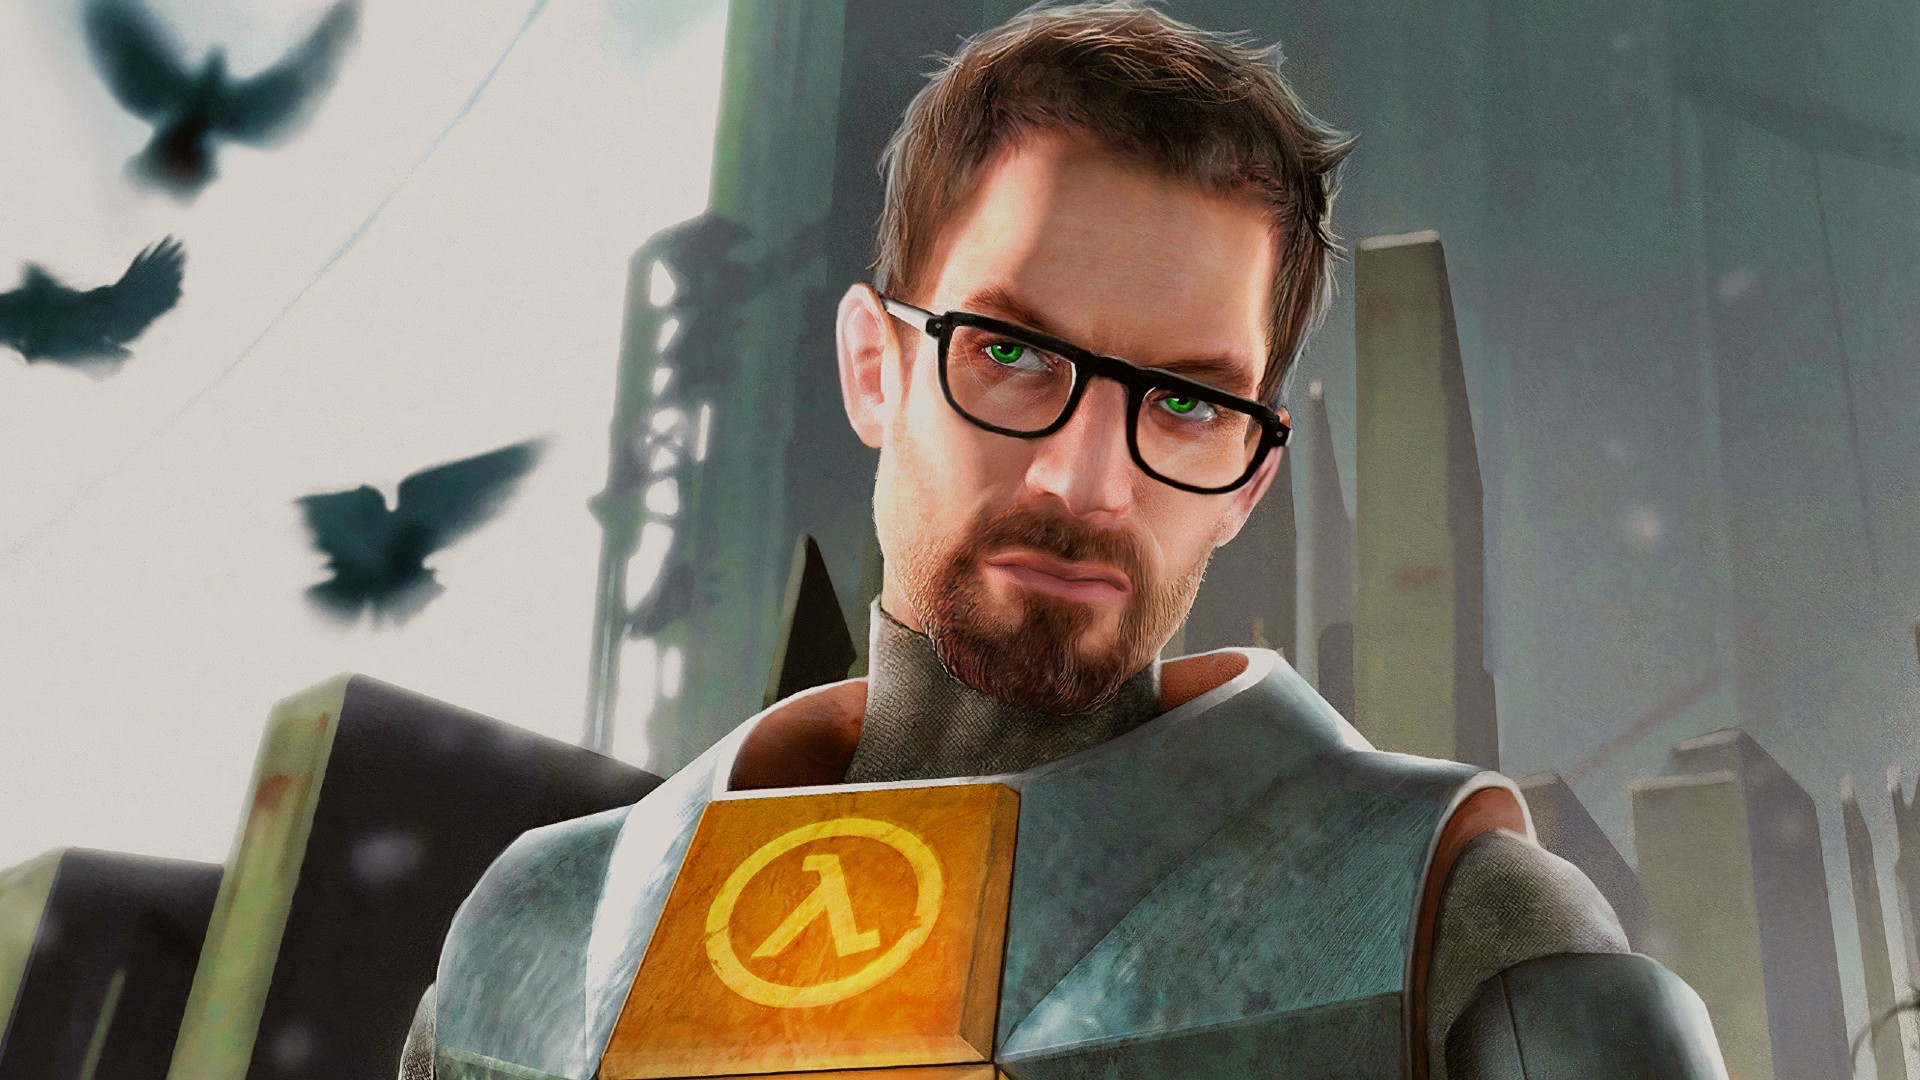 Half-Life 2 VR has a confirmed beta release date, with a twist